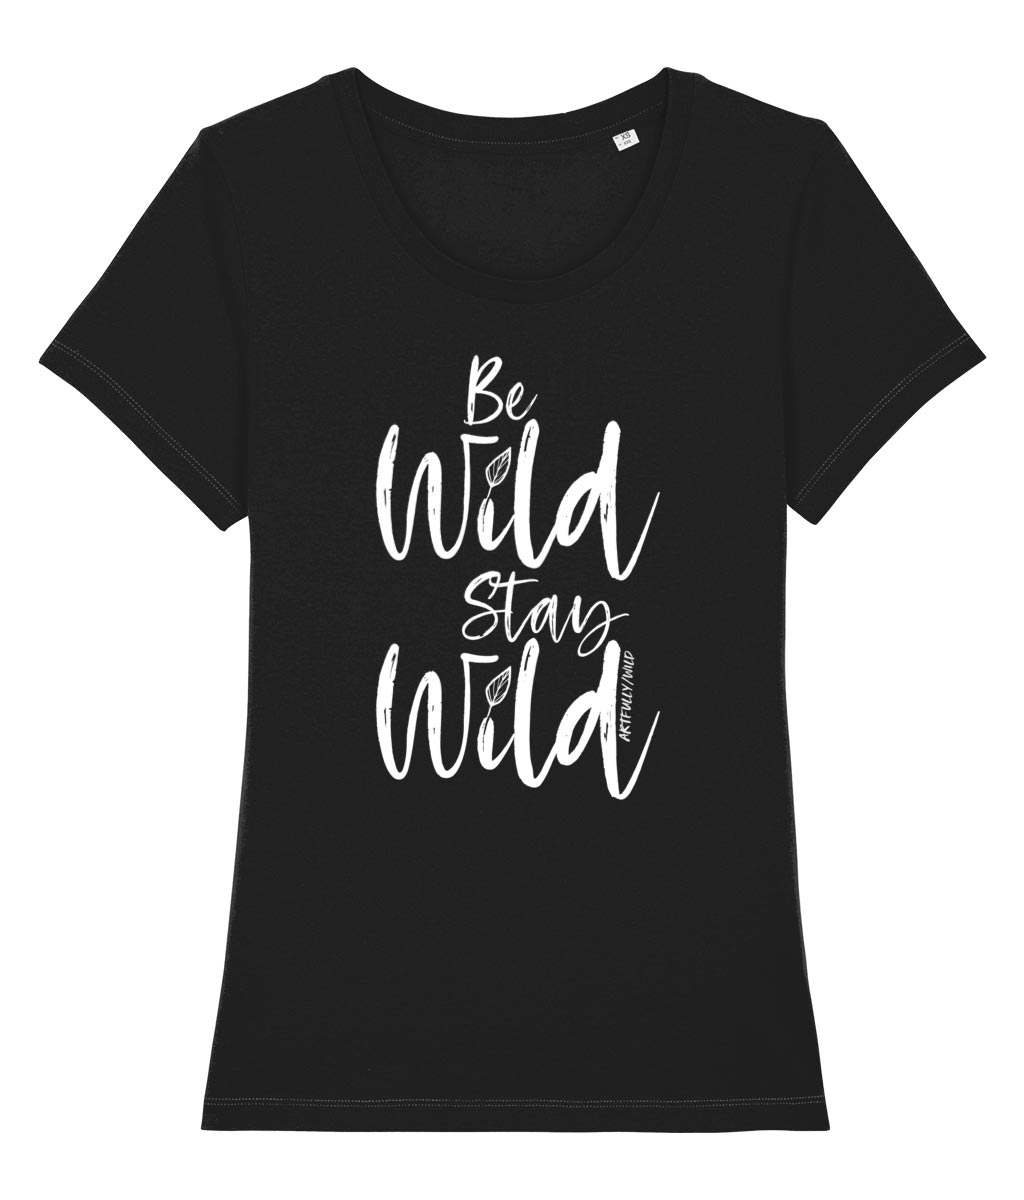 ‘BE WILD STAY WILD’ Women's Black Fitted T-Shirt. Sustainable organic cotton. White slogan print with water-based inks.